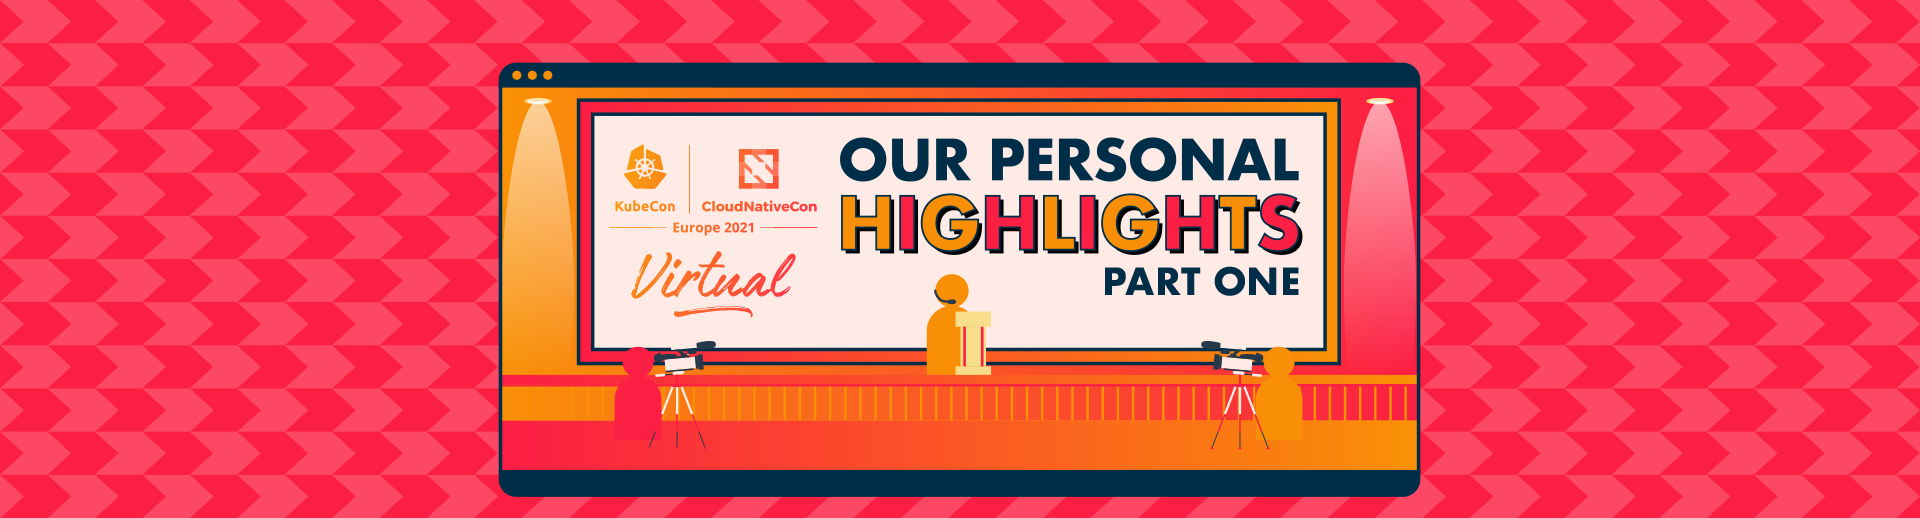 A speaker giving a presentation with KubeCon branding and the title 'Our Personal Highlights: Part One'